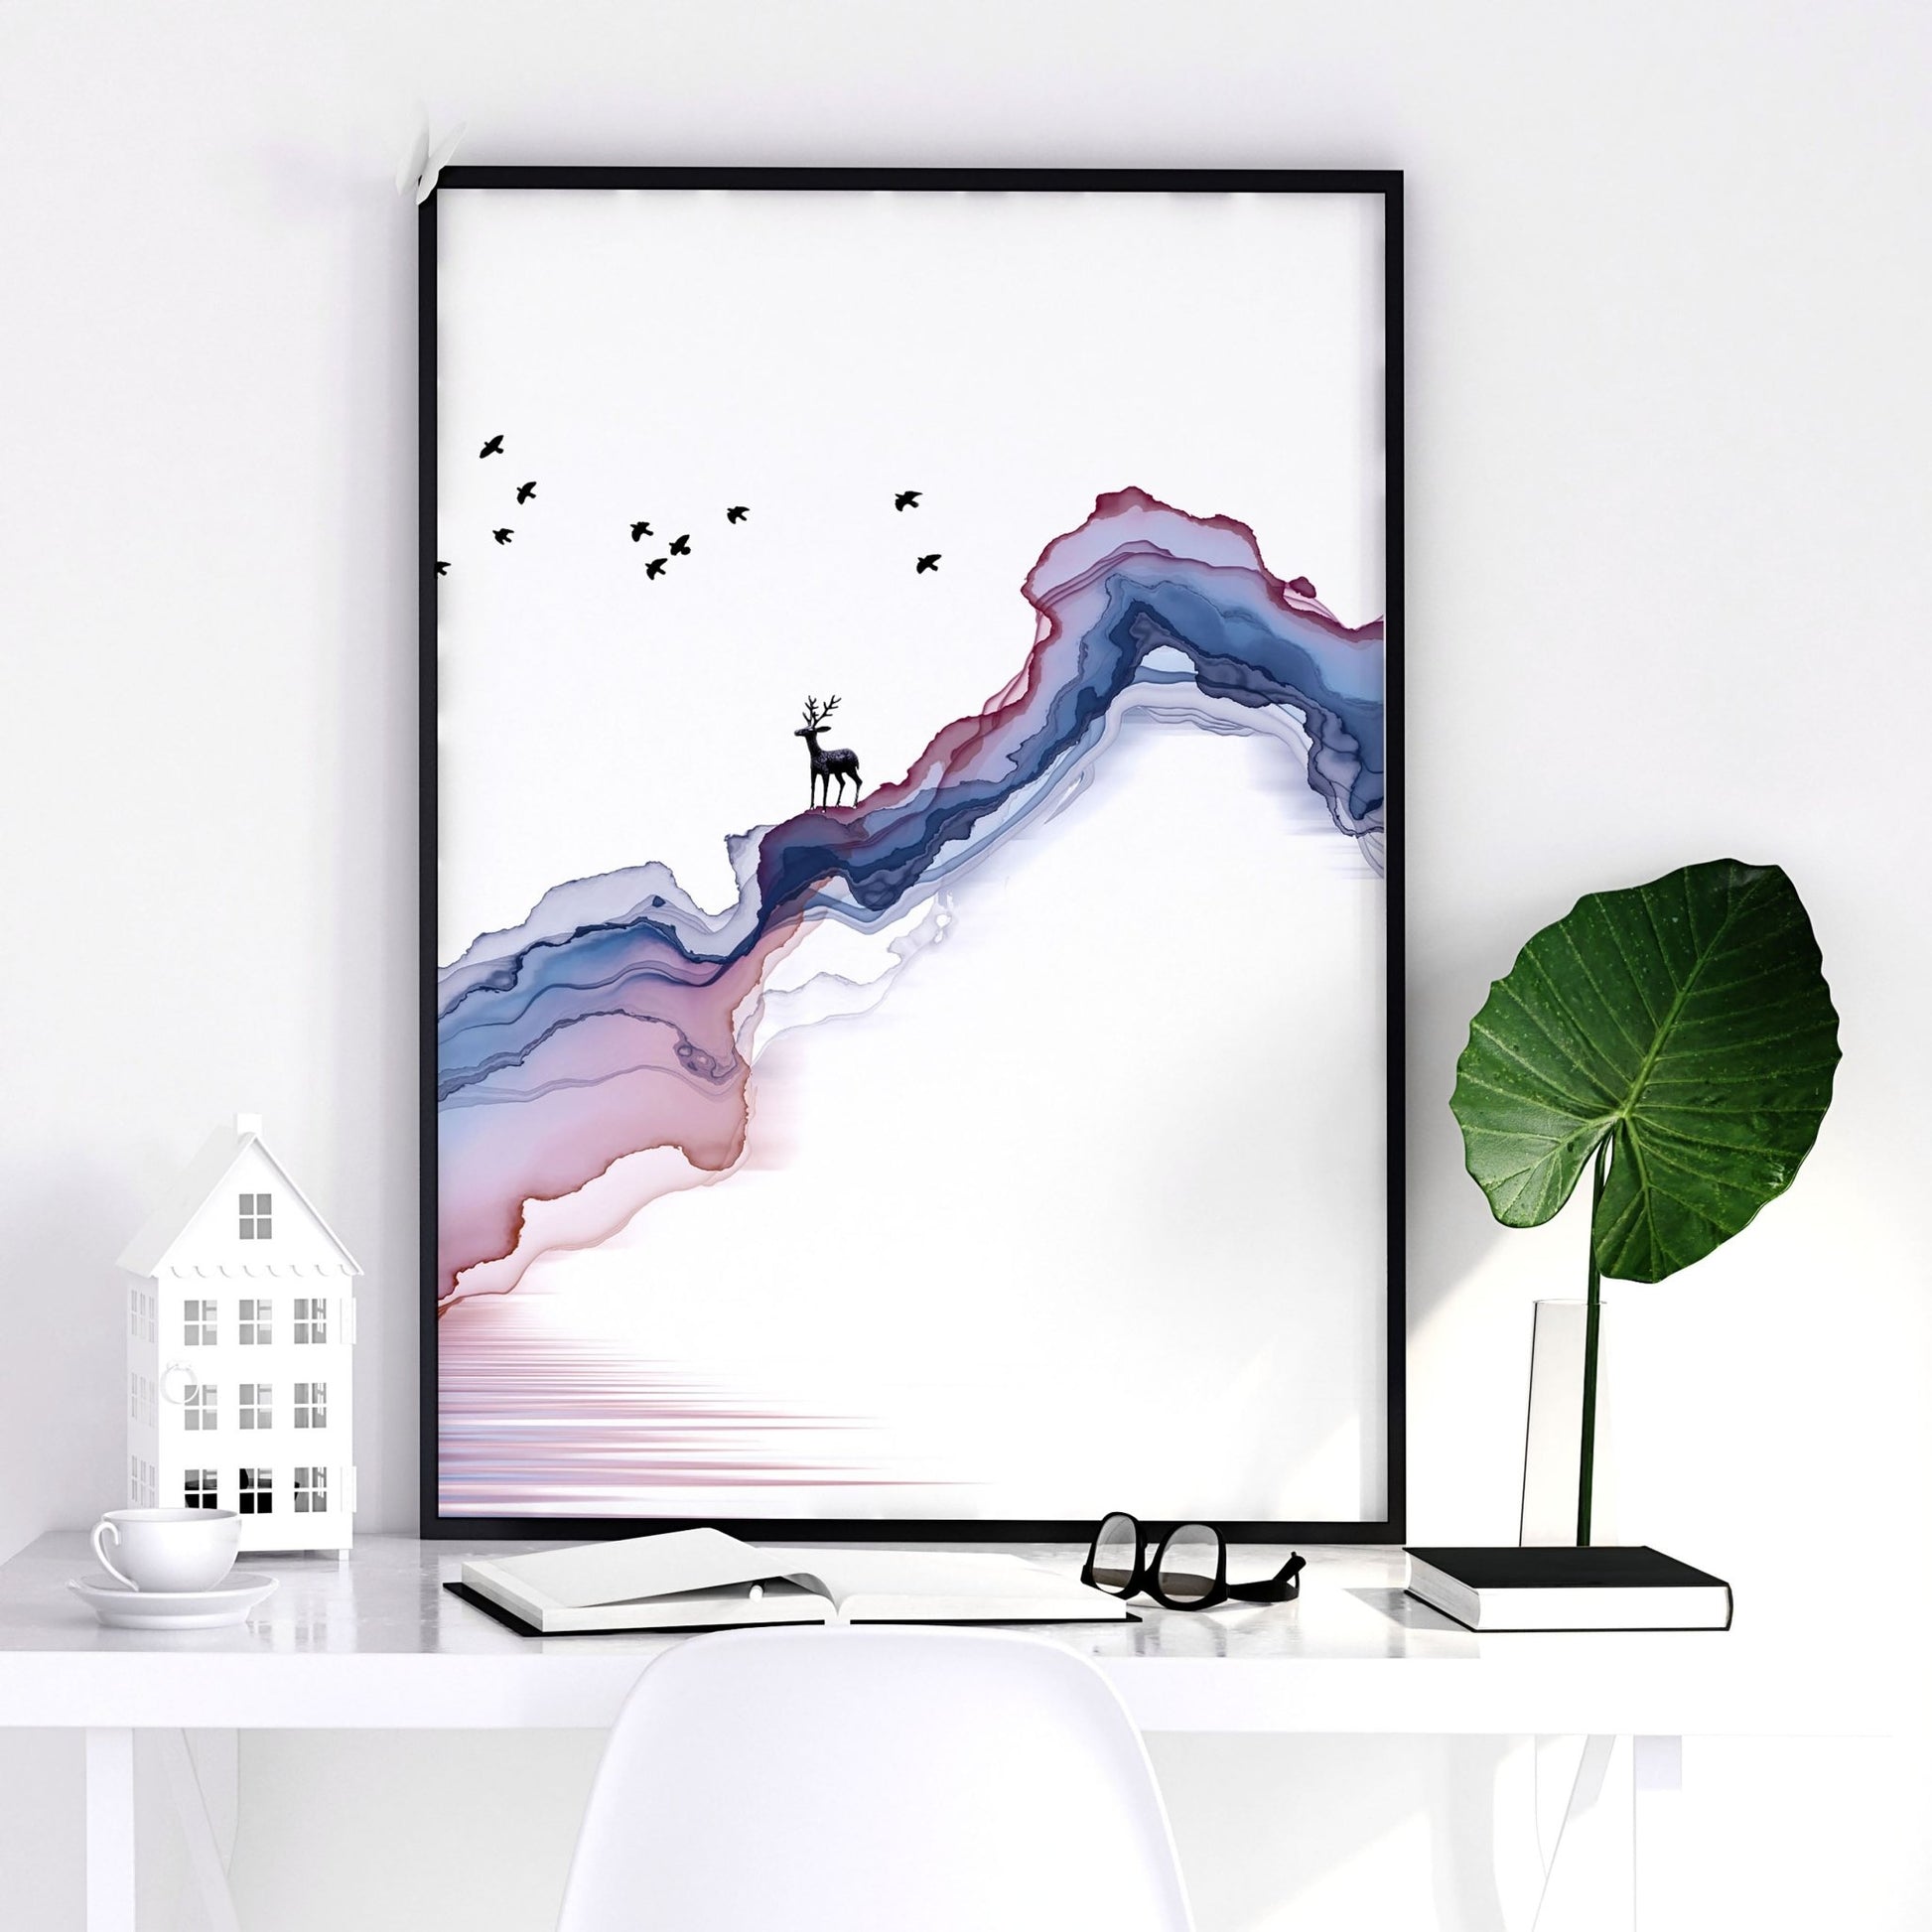 Wall art set of 3 | set of 3 Japanese wall art for office